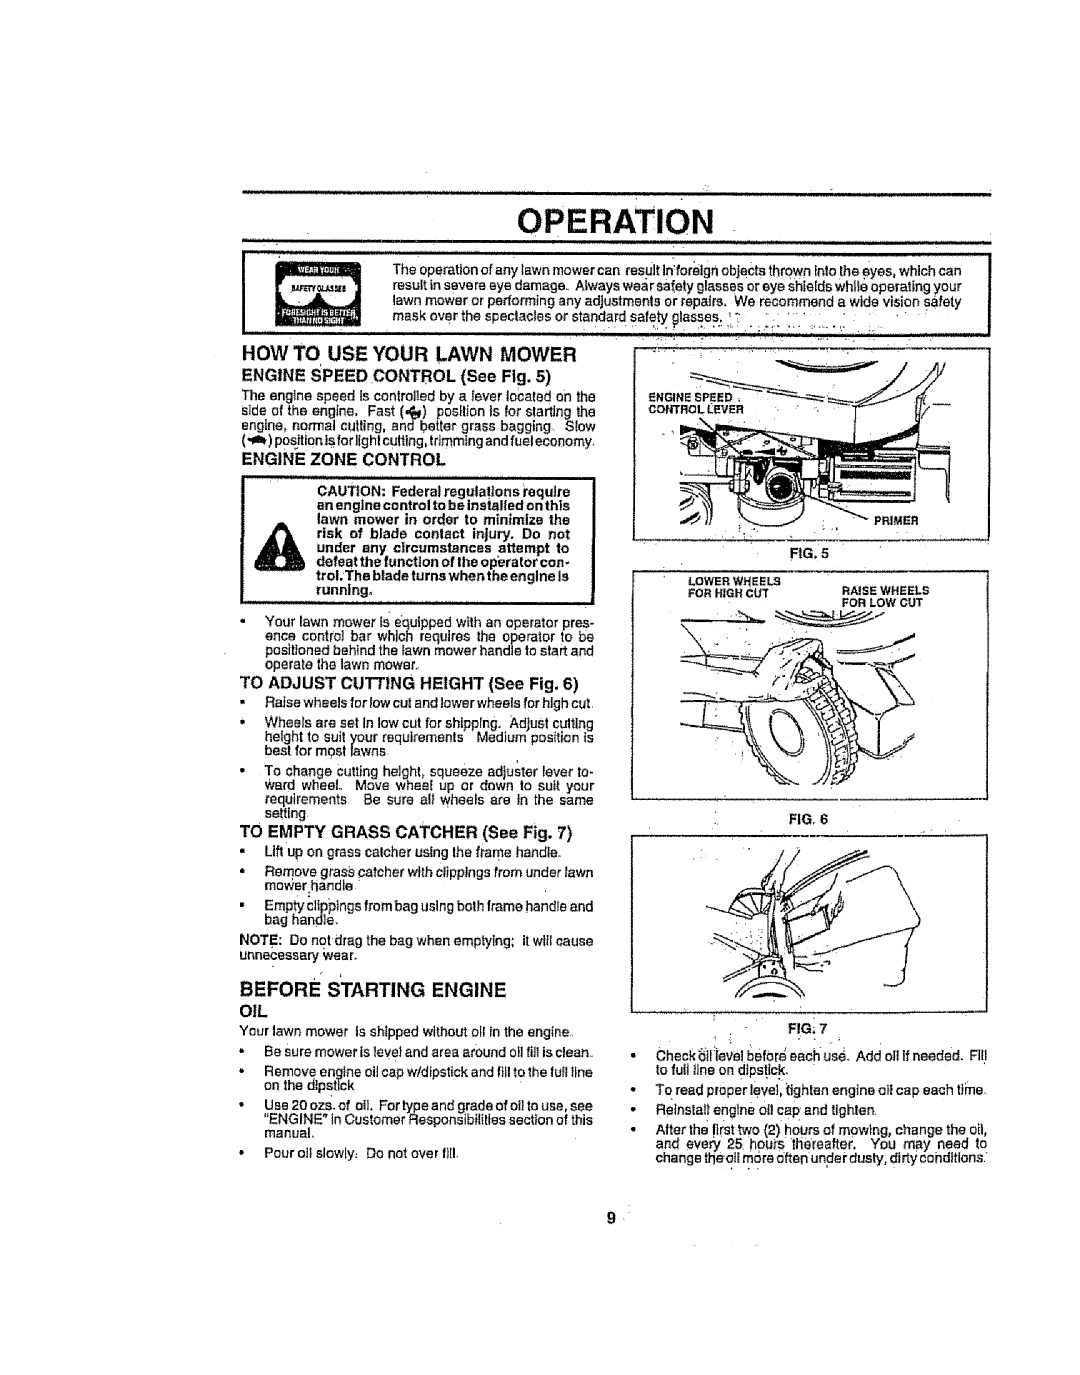 Sears 917386121 Operation, How To Use Your Lawn Mower, ENGINE SPEED CONTROL See Fig, Engine Zone Control, Before Starting 